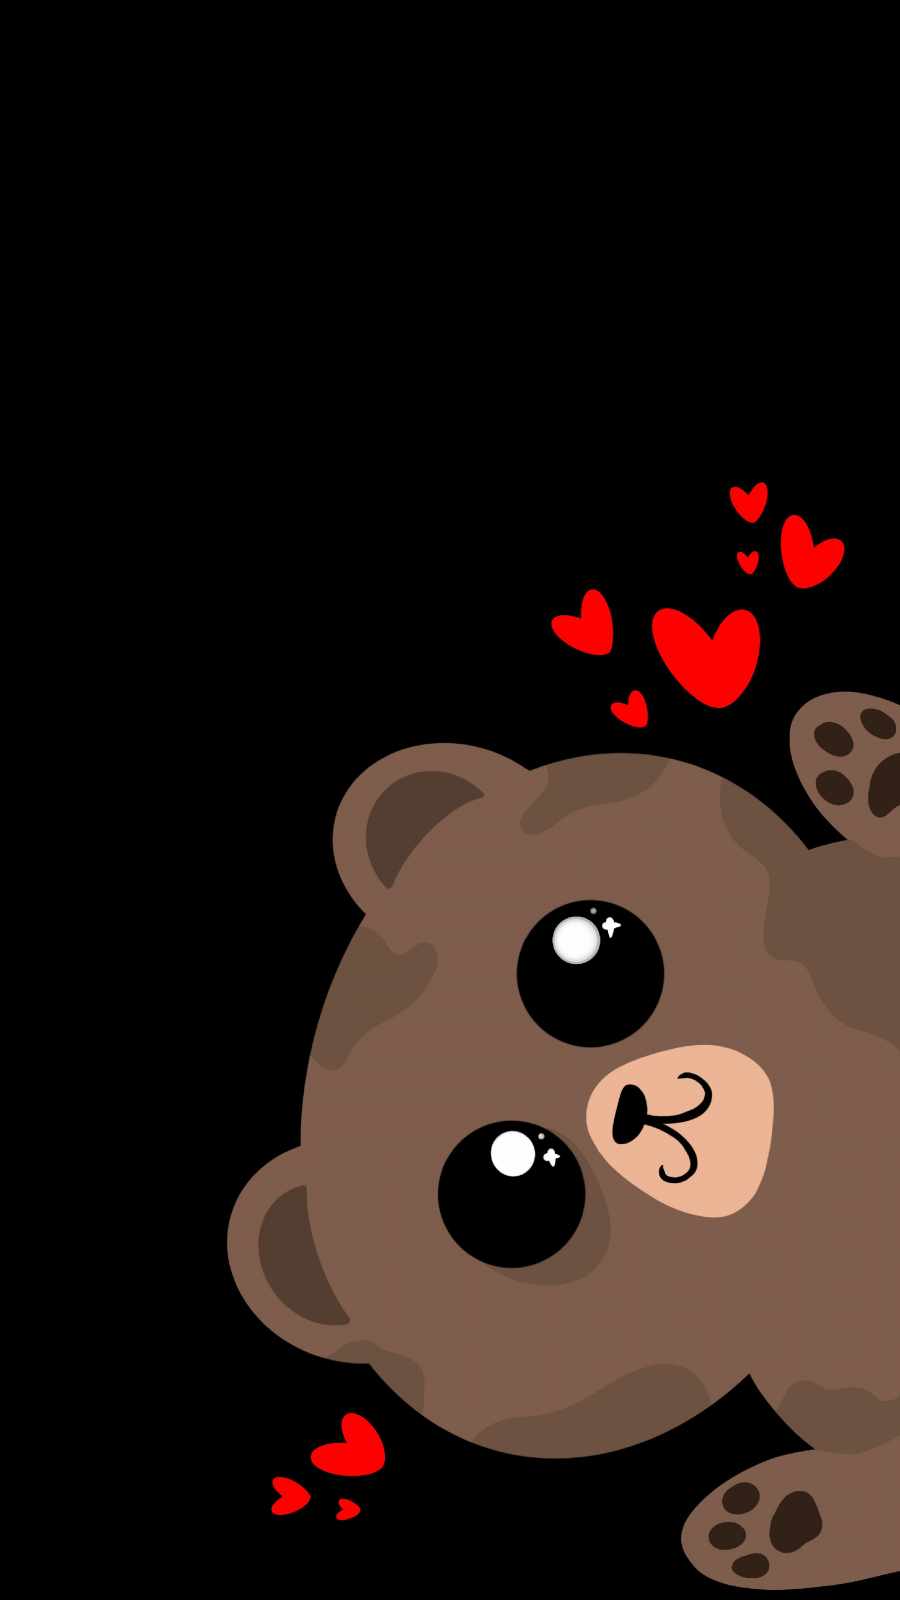 Love Teddy - IPhone Wallpapers : iPhone Wallpapers